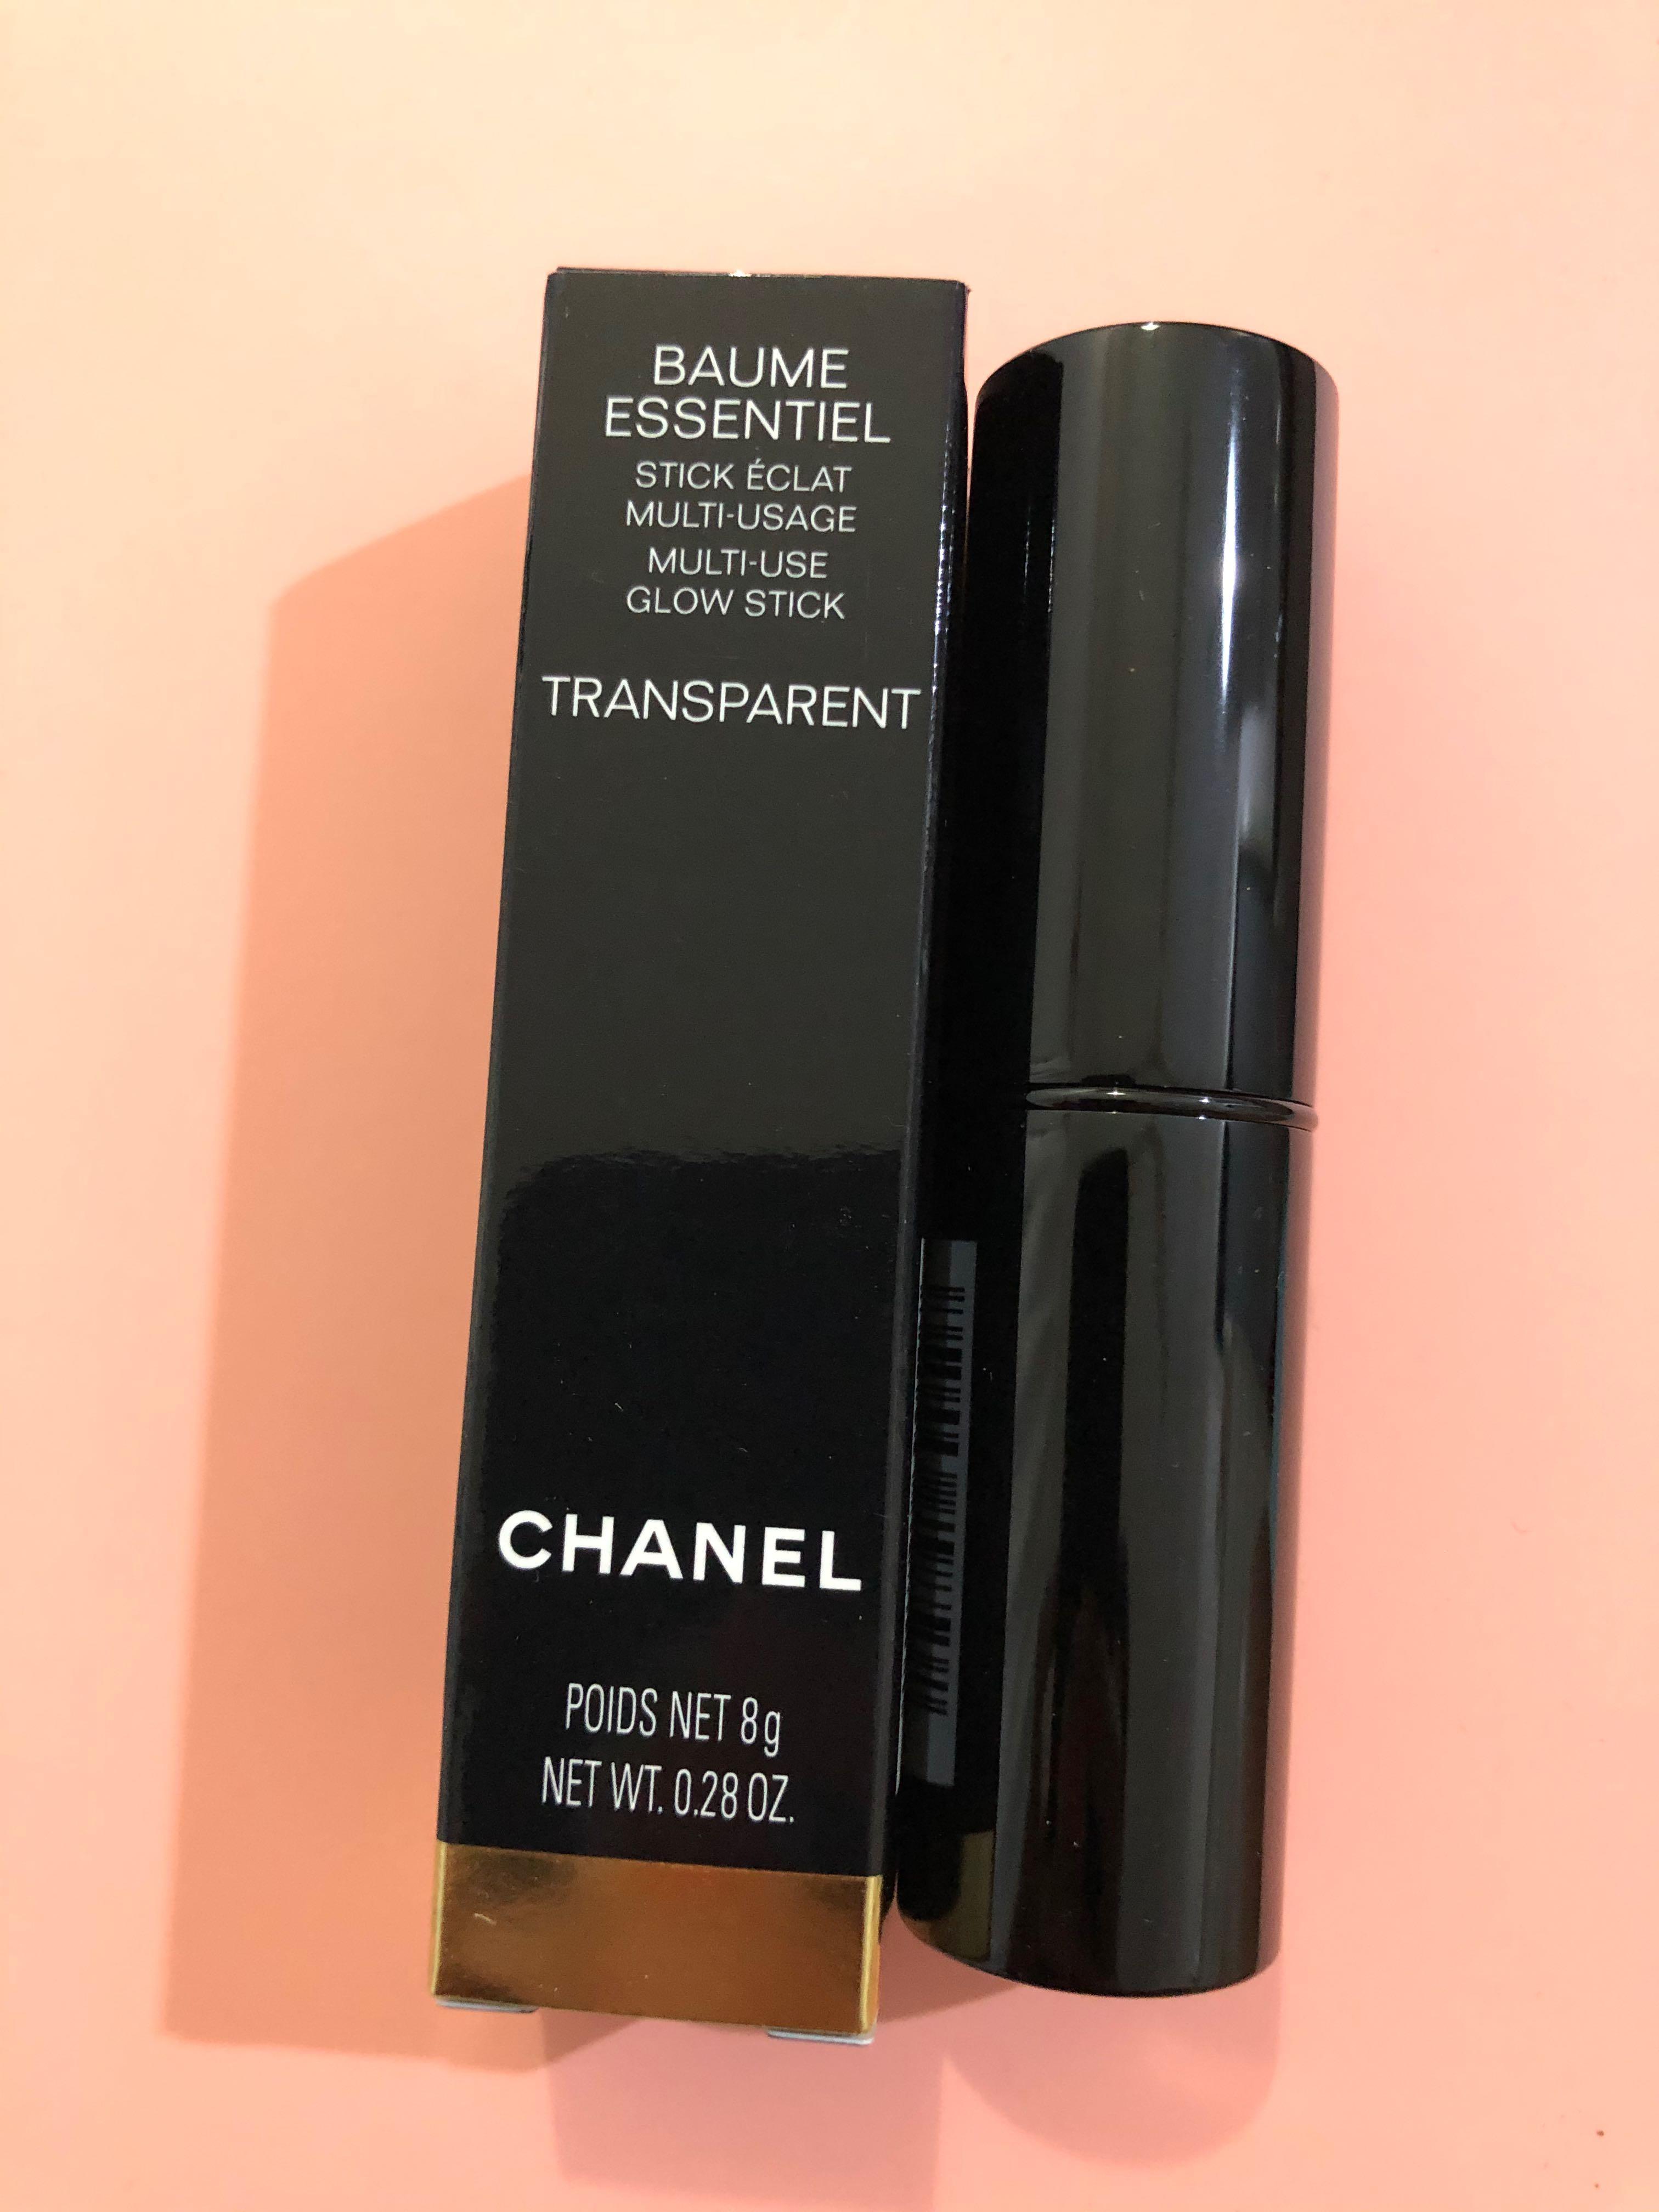 Replying to @adastra944 CHANEl BAUME ESSENTIEL Multi-Use Glow Stick #, chanel  baume essential